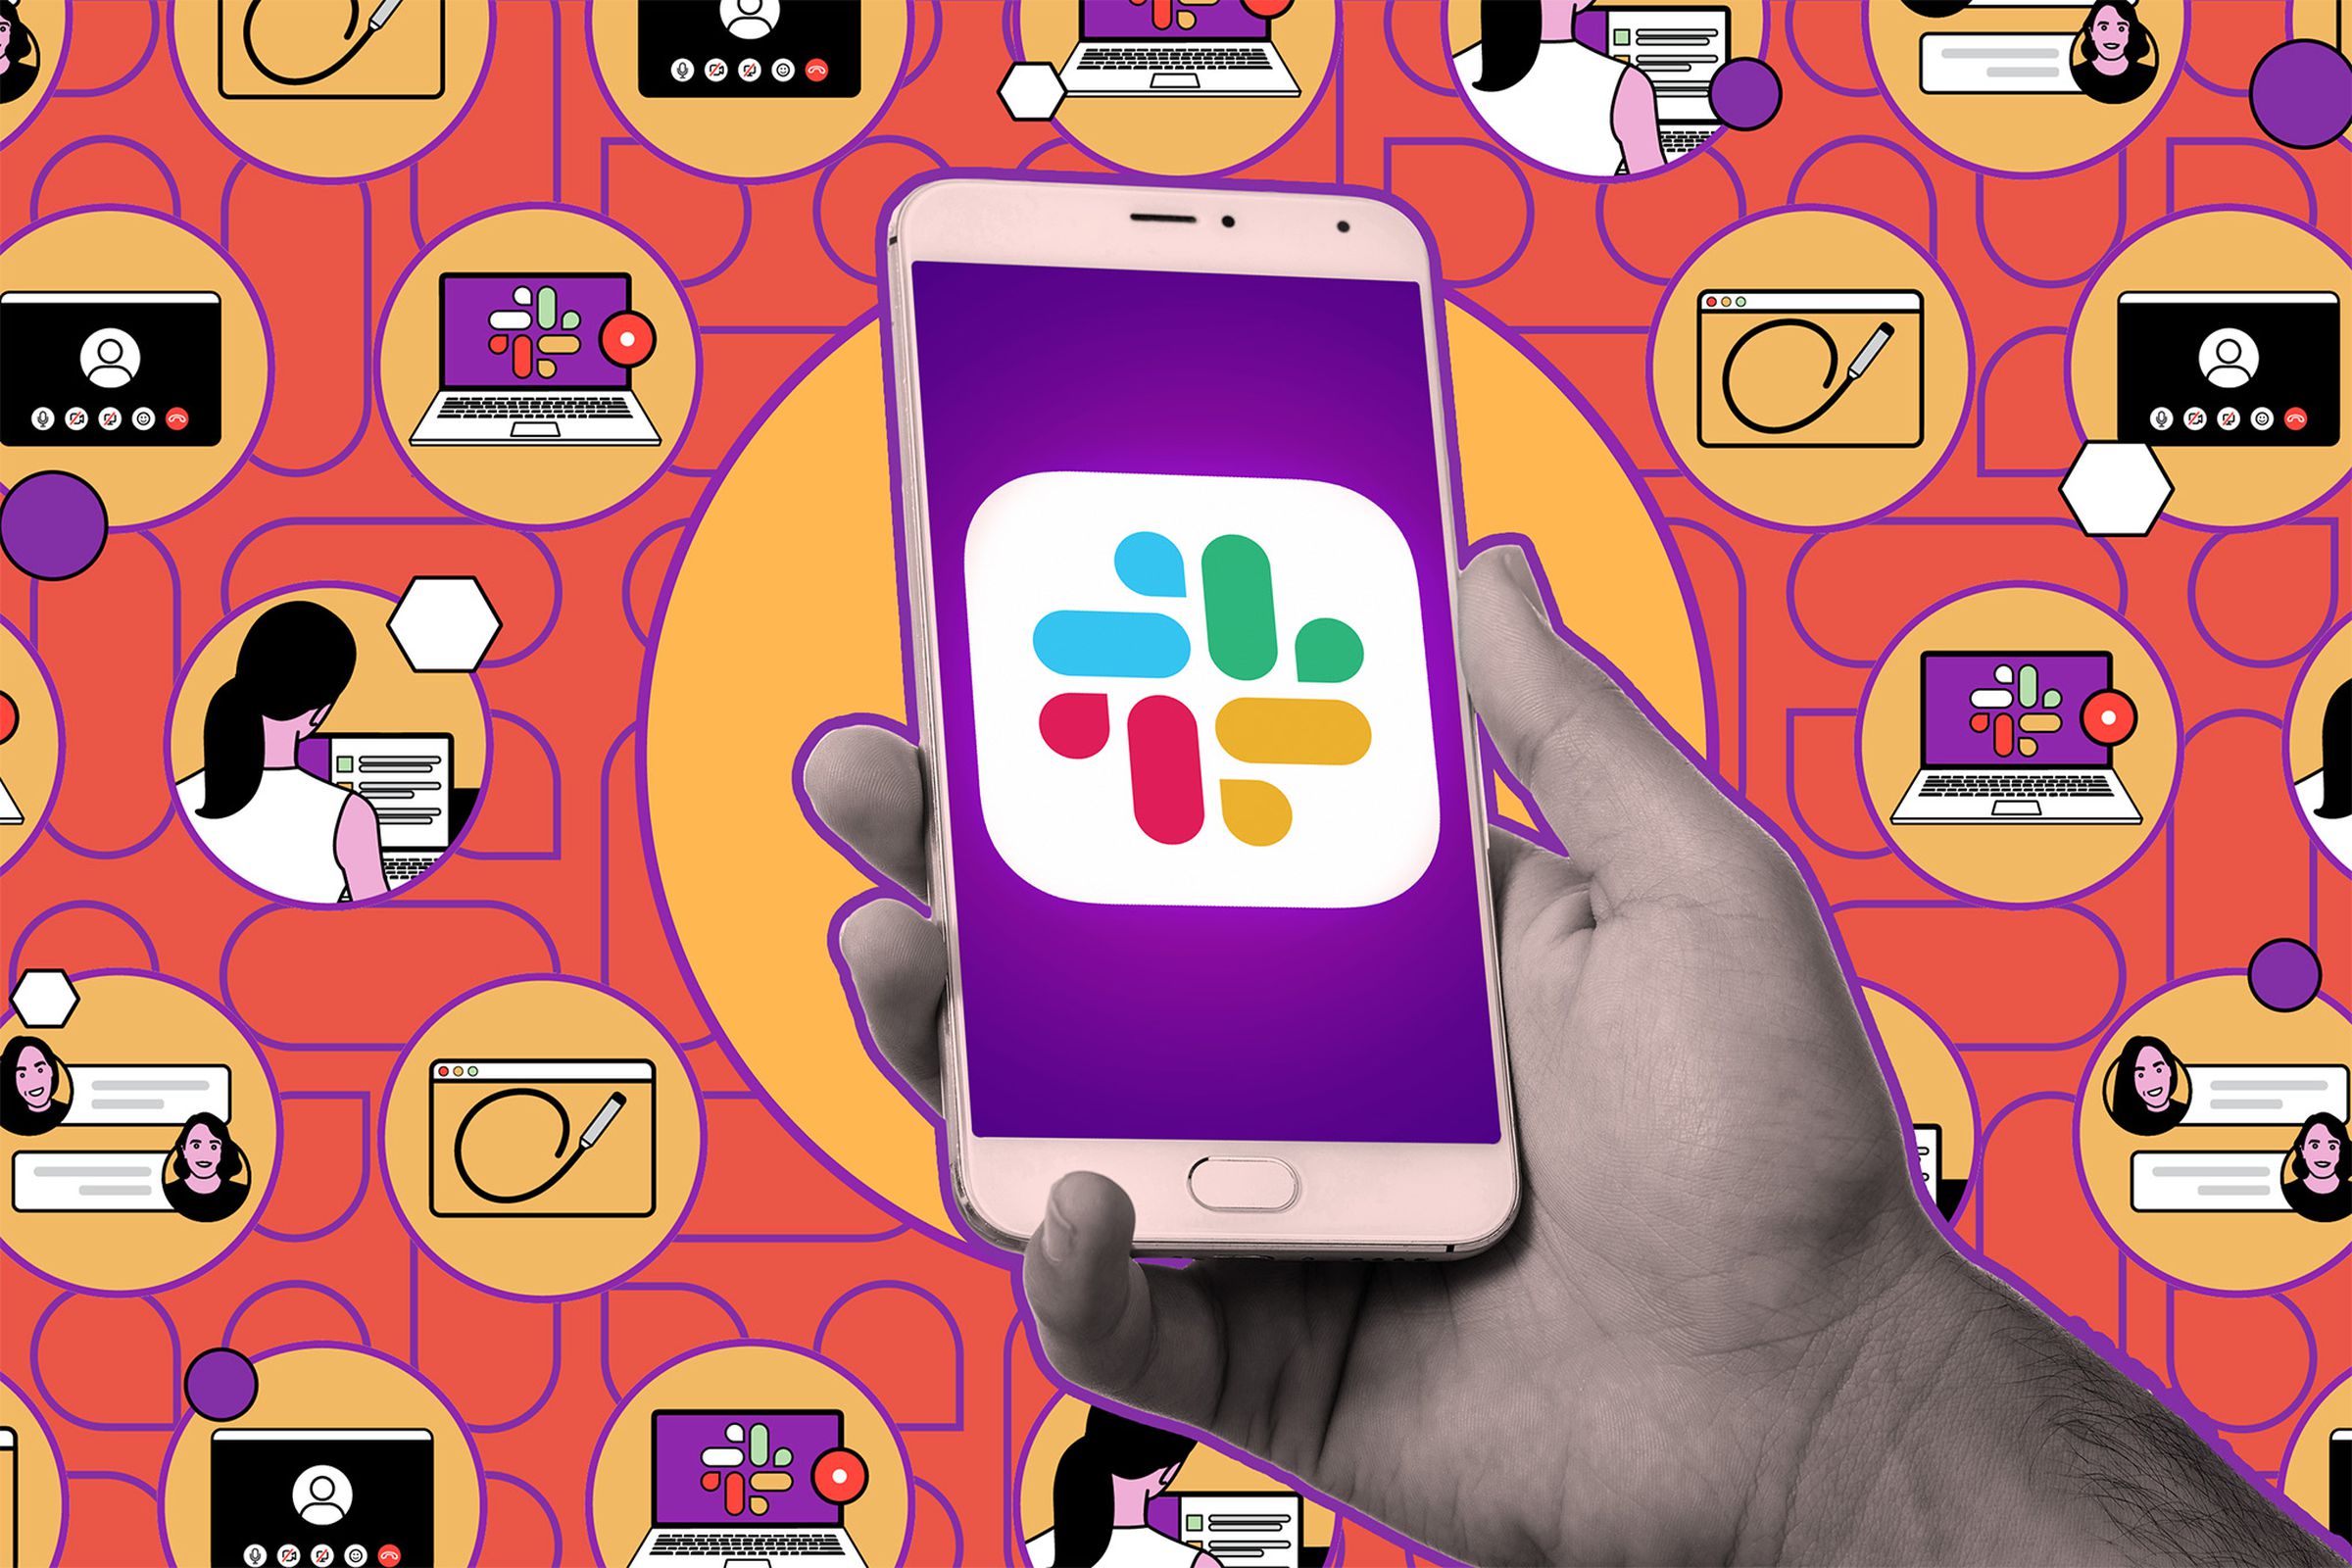 Phone with Slack logo against an illustrated background